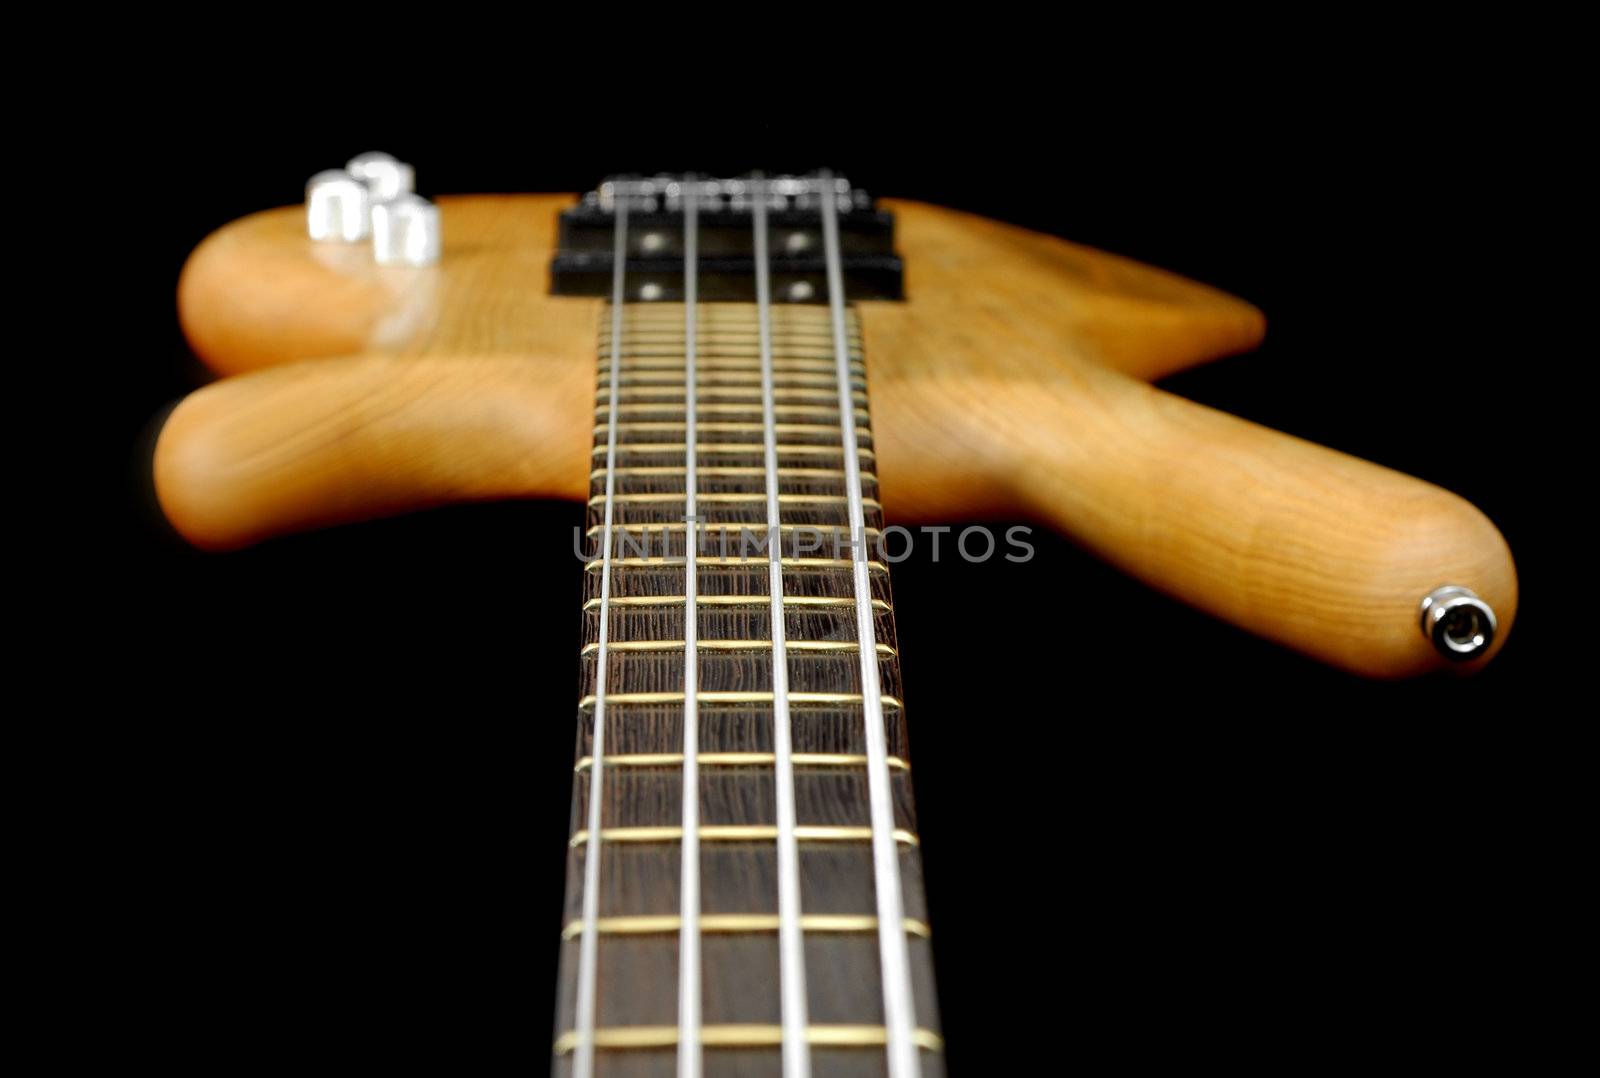 view down the neck of a four string bass guitar